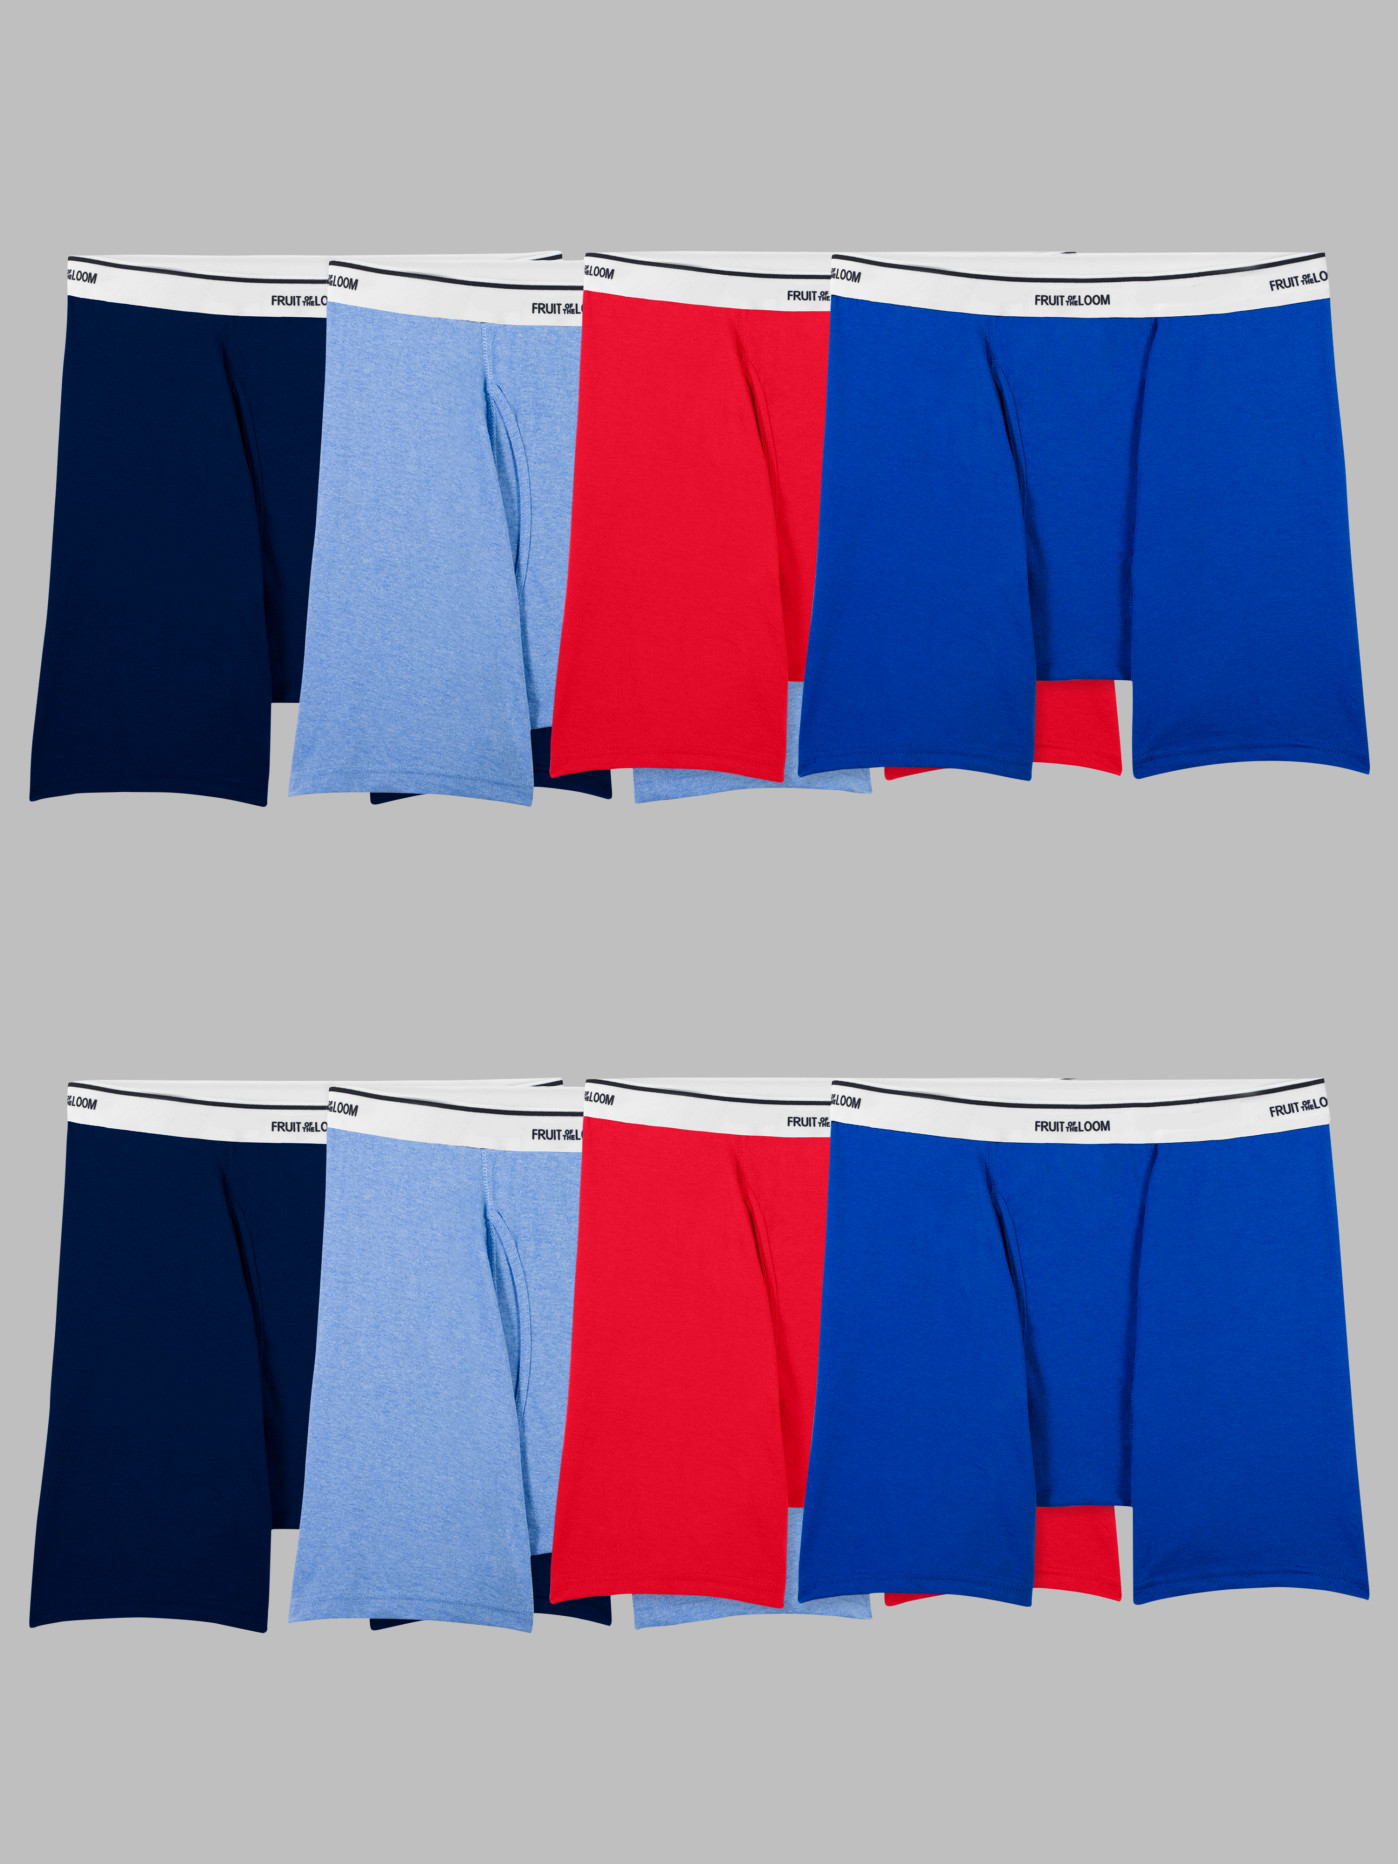  Hanes Ultimate Boys' 5-Pack Boxer Briefs, Blue/Red